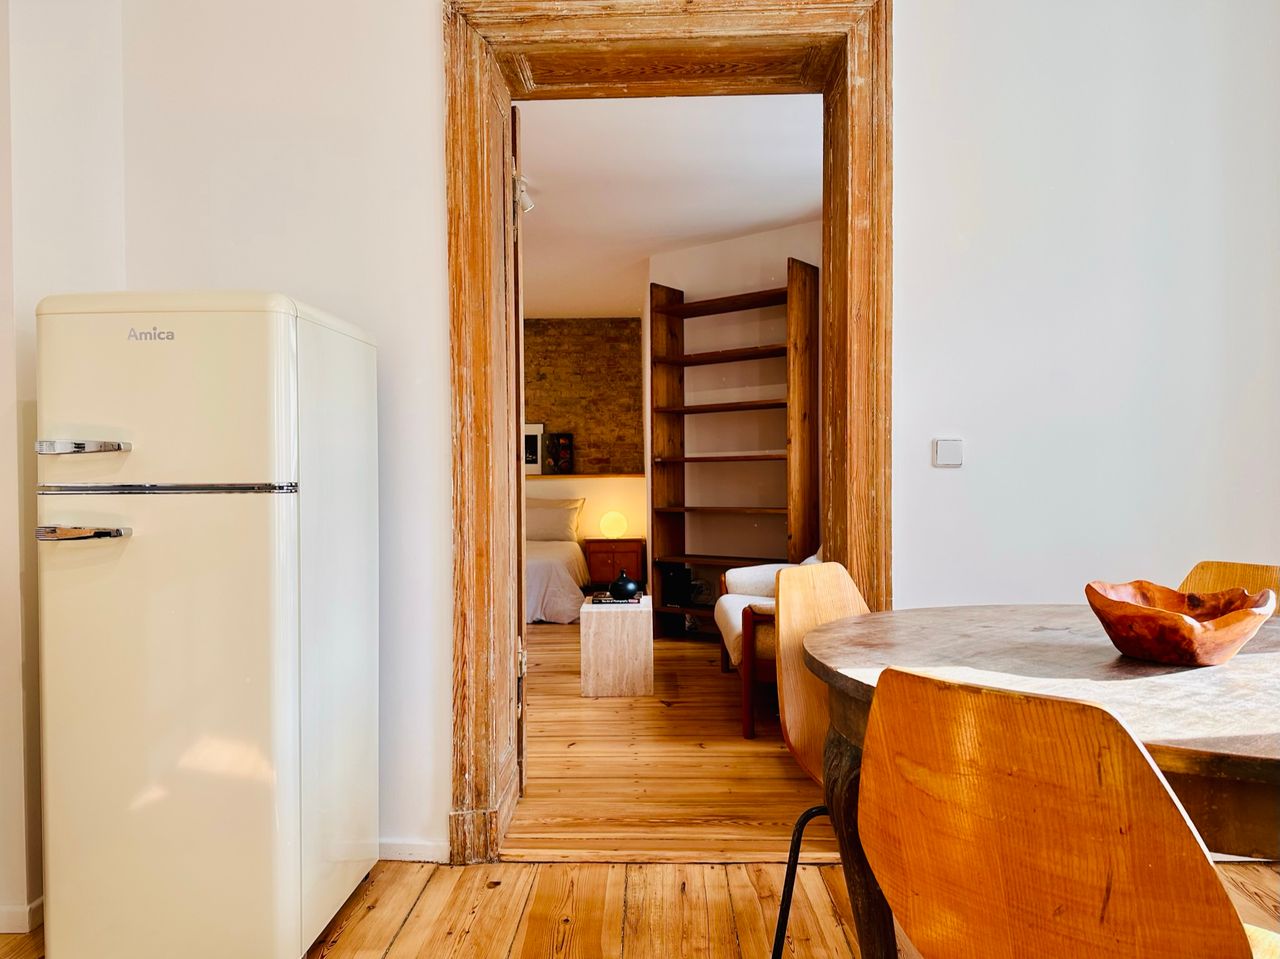 Light, quiet and beautifully furnished flat in the heart of Prenzlauer Berg!